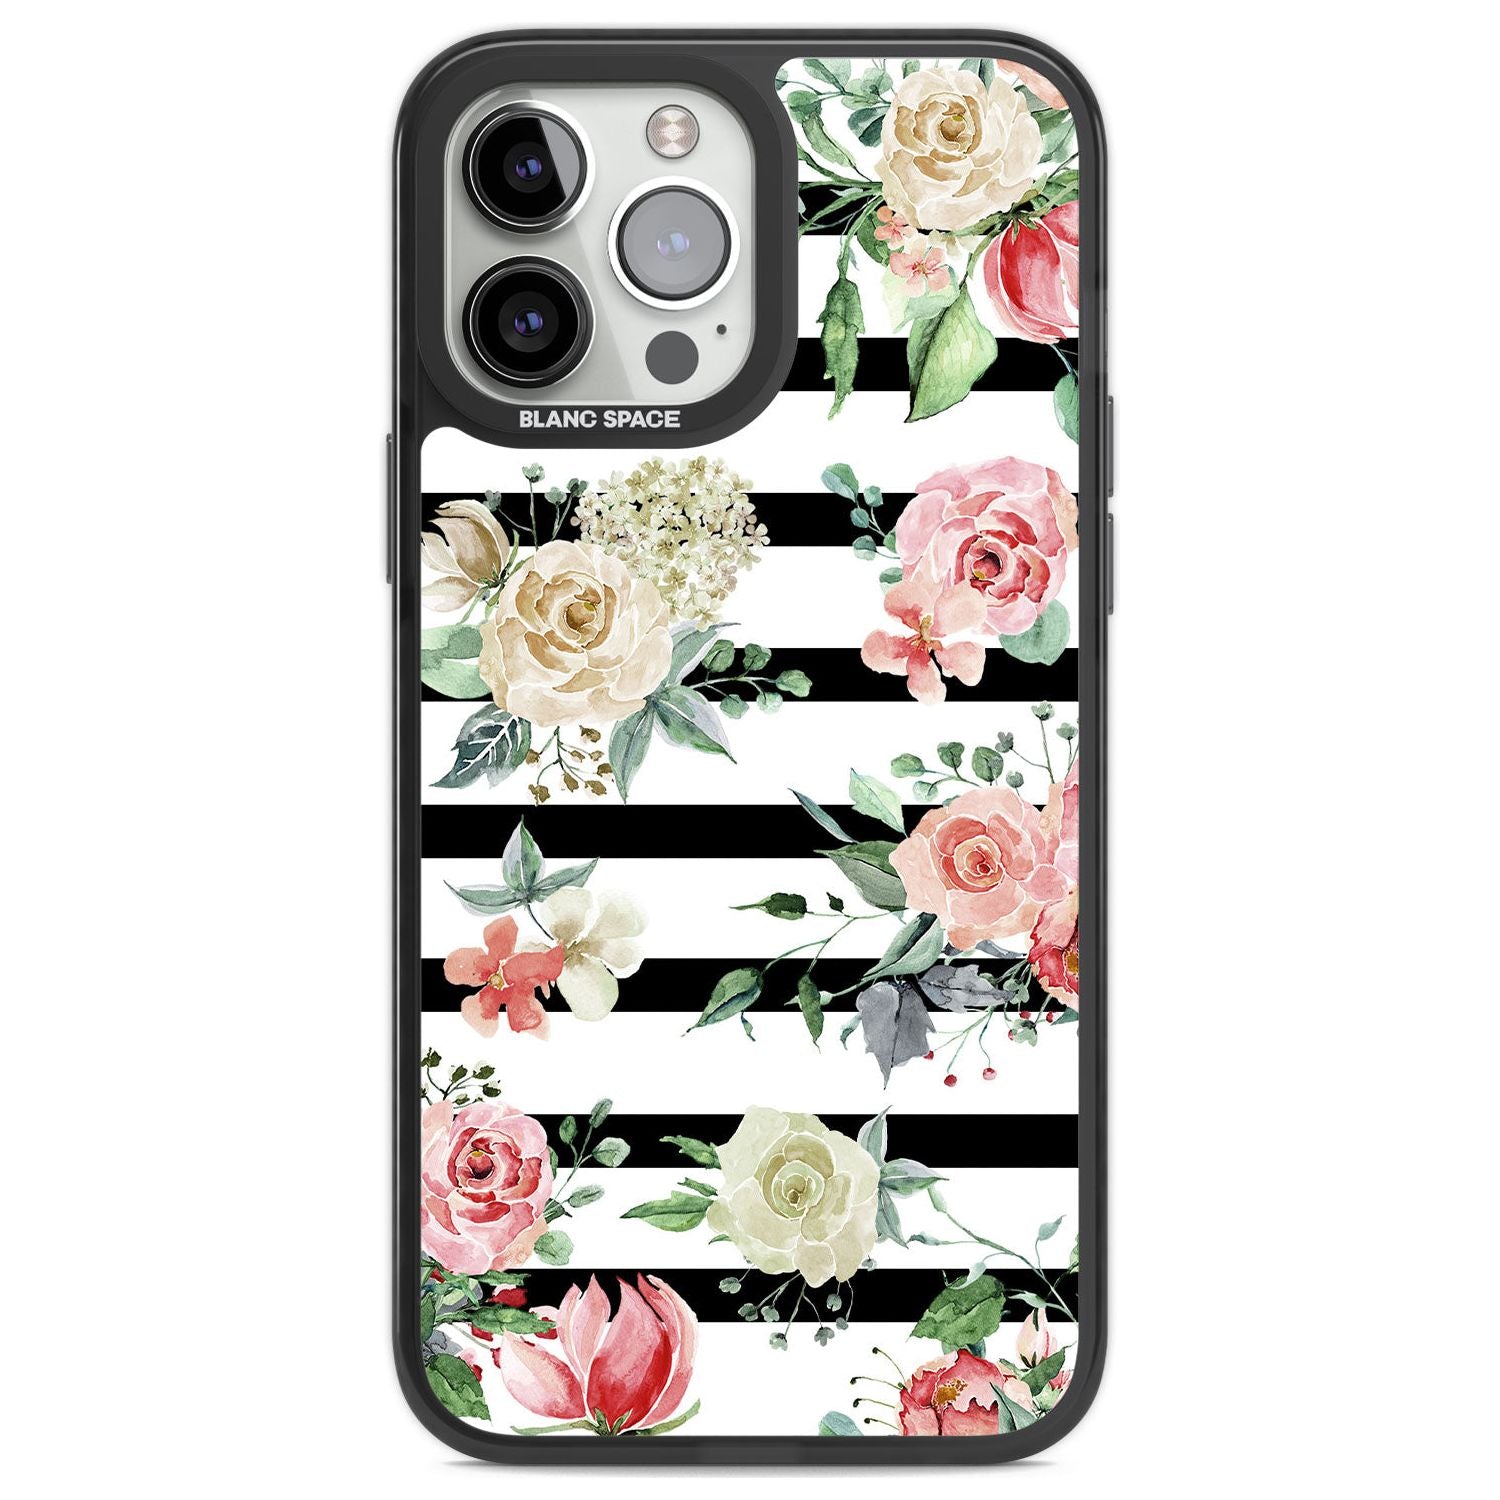 Bold Stripes & Flower Pattern Phone Case iPhone 13 Pro Max / Black Impact Case,iPhone 14 Pro Max / Black Impact Case Blanc Space